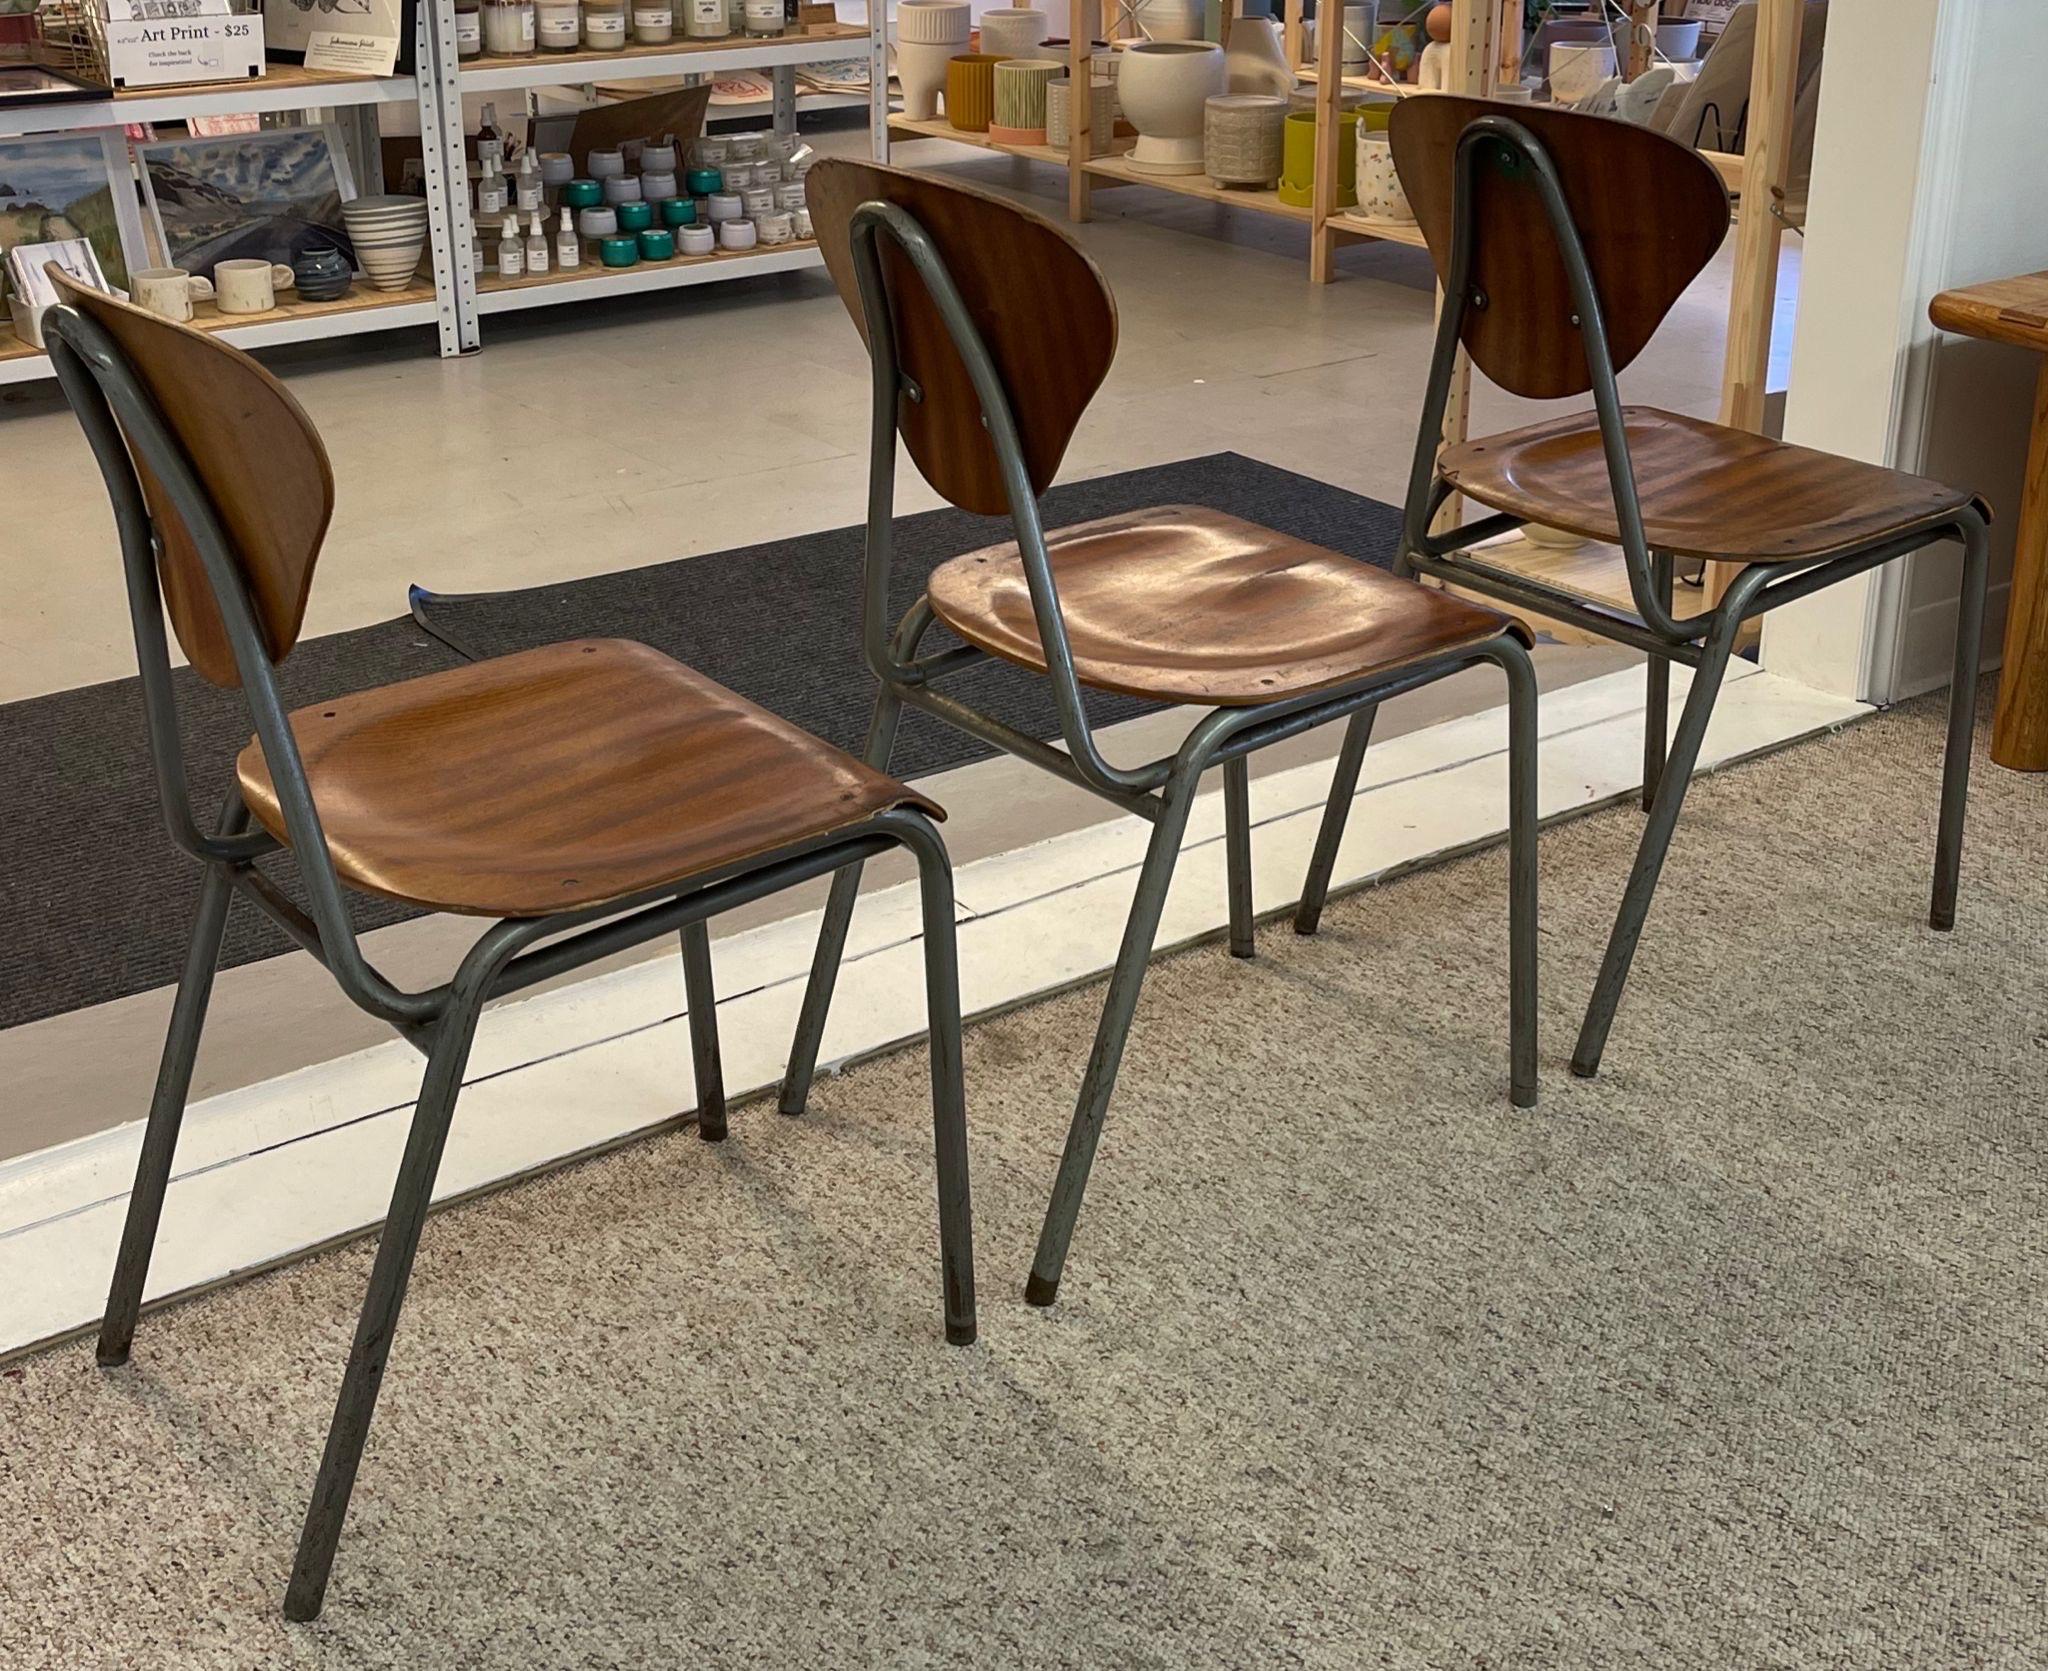 Late 20th Century Vintage Danish Modern Chairs With Metal Frame. Set of 4. For Sale